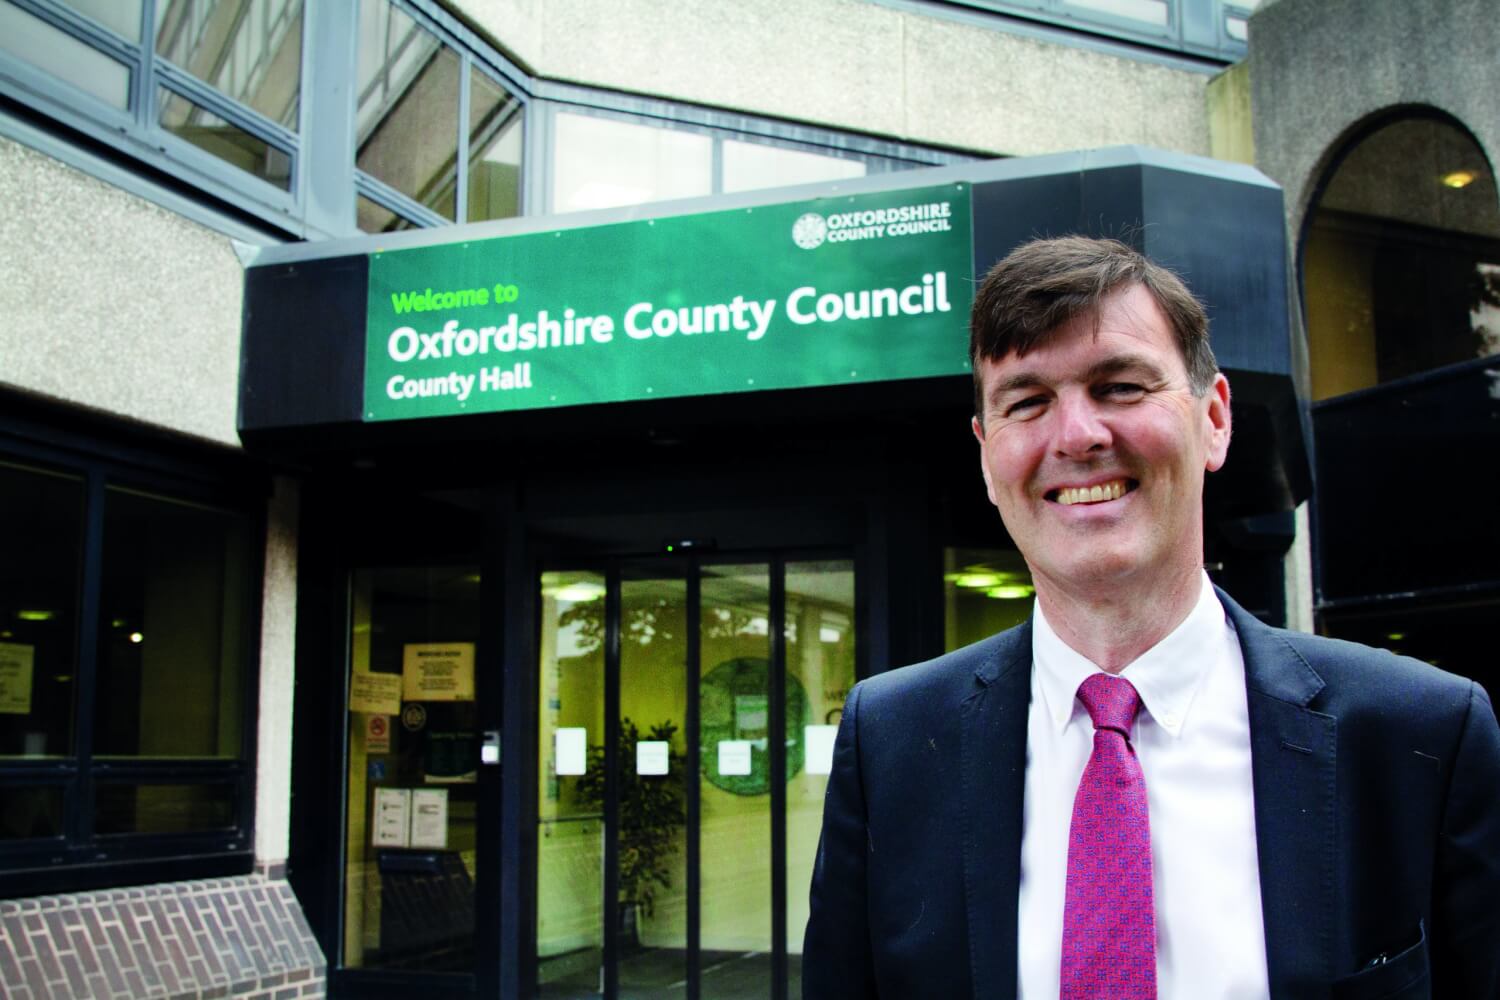 Cllr Duncan Enright, Oxfordshire County council’s Cabinet Member